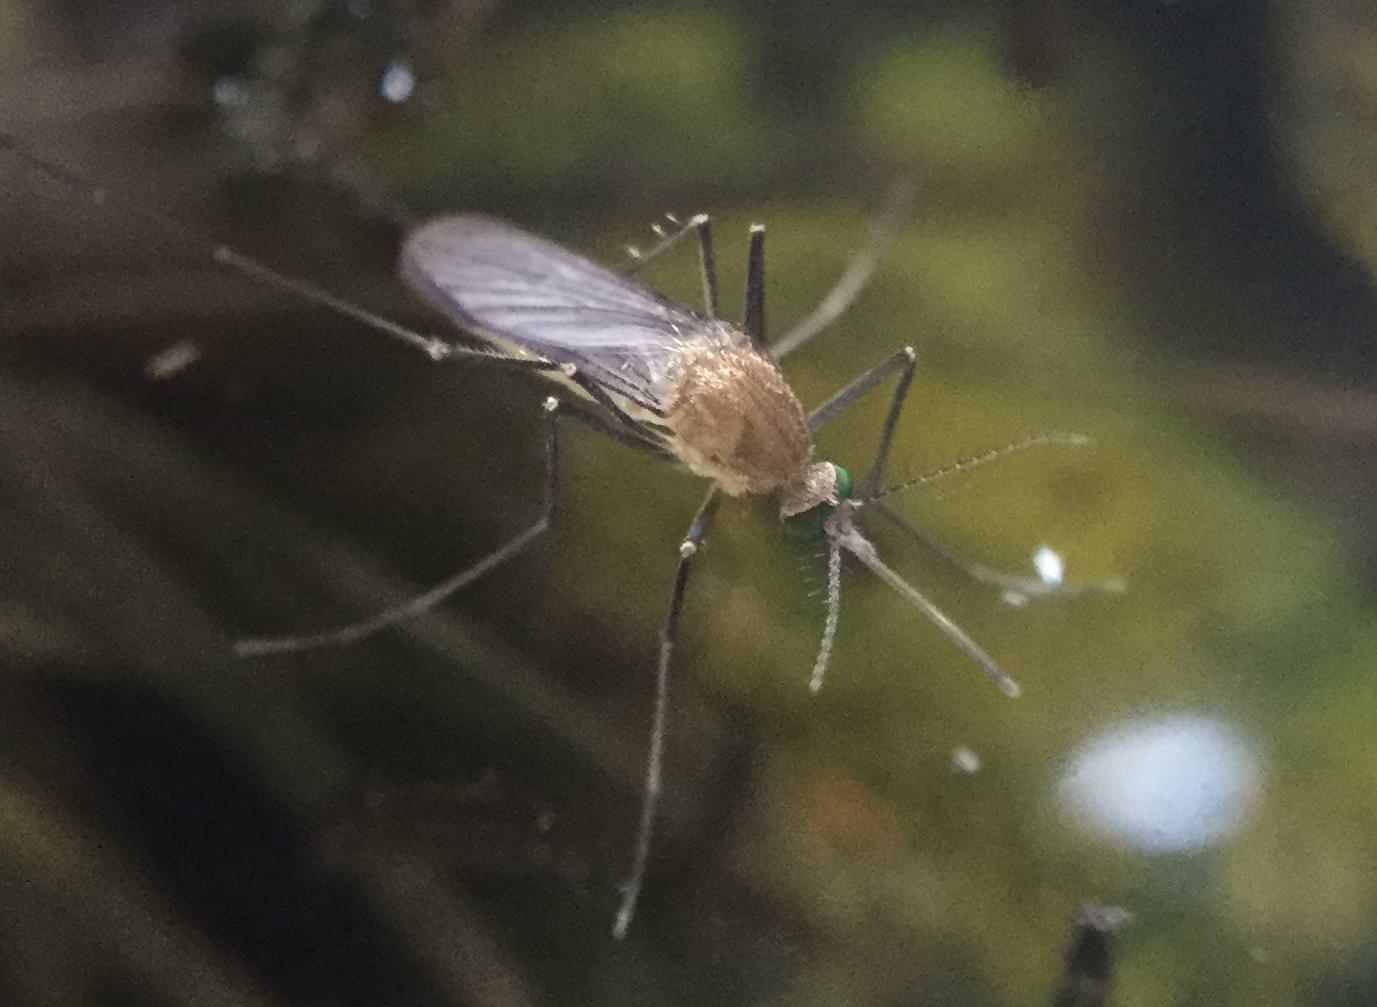 An adult mosquito resting on the surface of the water. It has feathery antennae and long bendy legs.